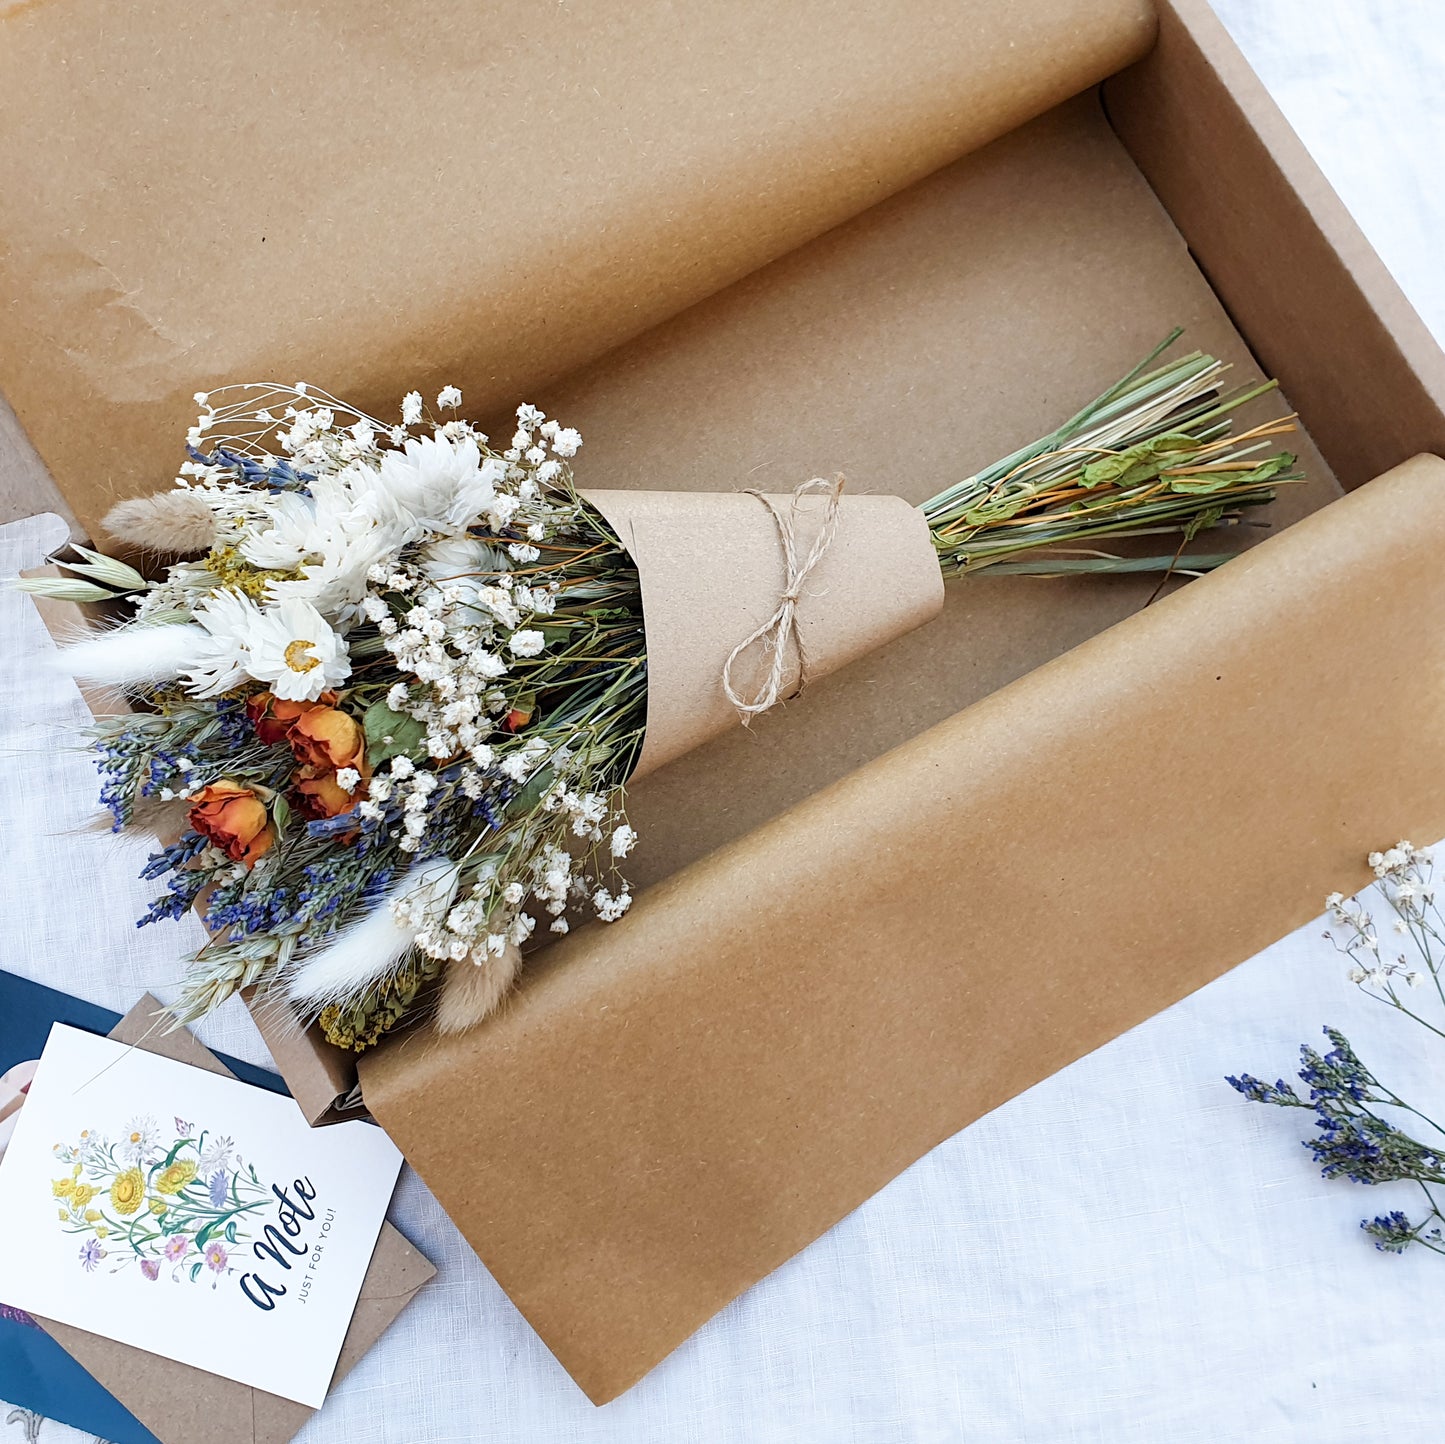 The dried flower bouquet wrapped in a kraft card cone sits in its packaging box with a pretty recycled tissue layer. It has small orange roses, white daisies with yellow centres, lilac sea lavender and pretty white gypsophila among other grasses and fillers. In the background you can see the optional gift card and instructions for caring for dried flowers.